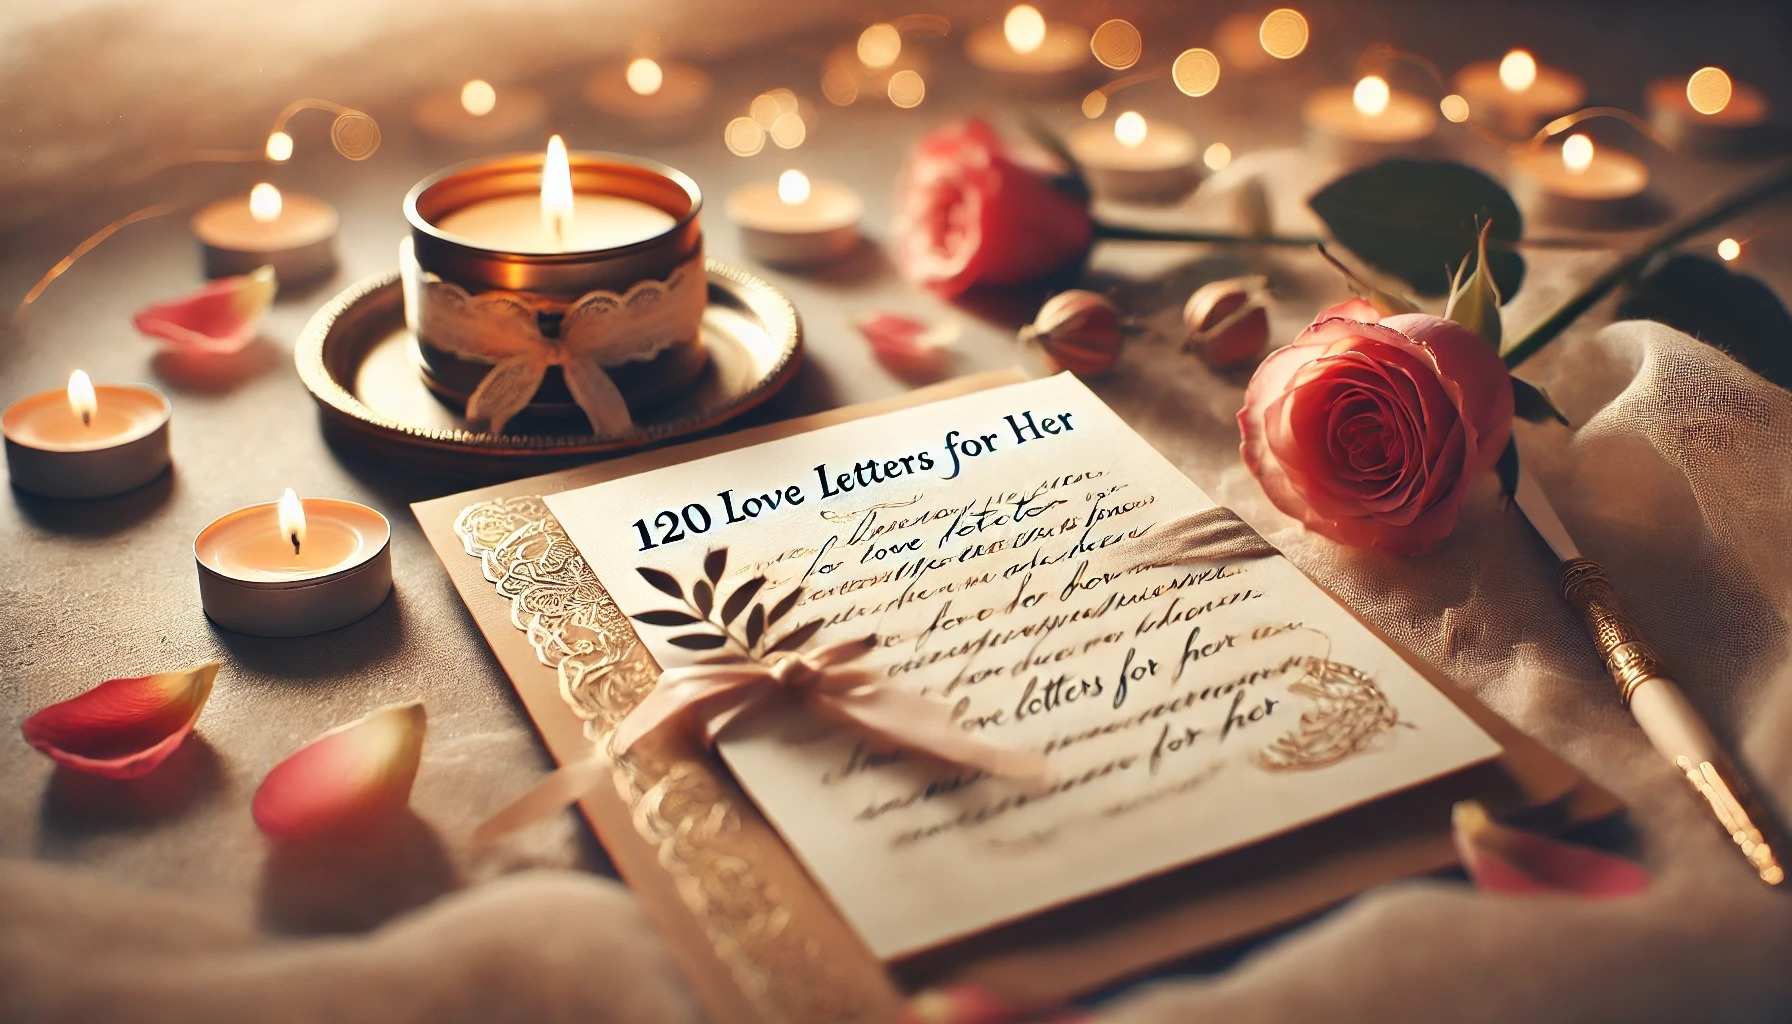 Love Letters for her -